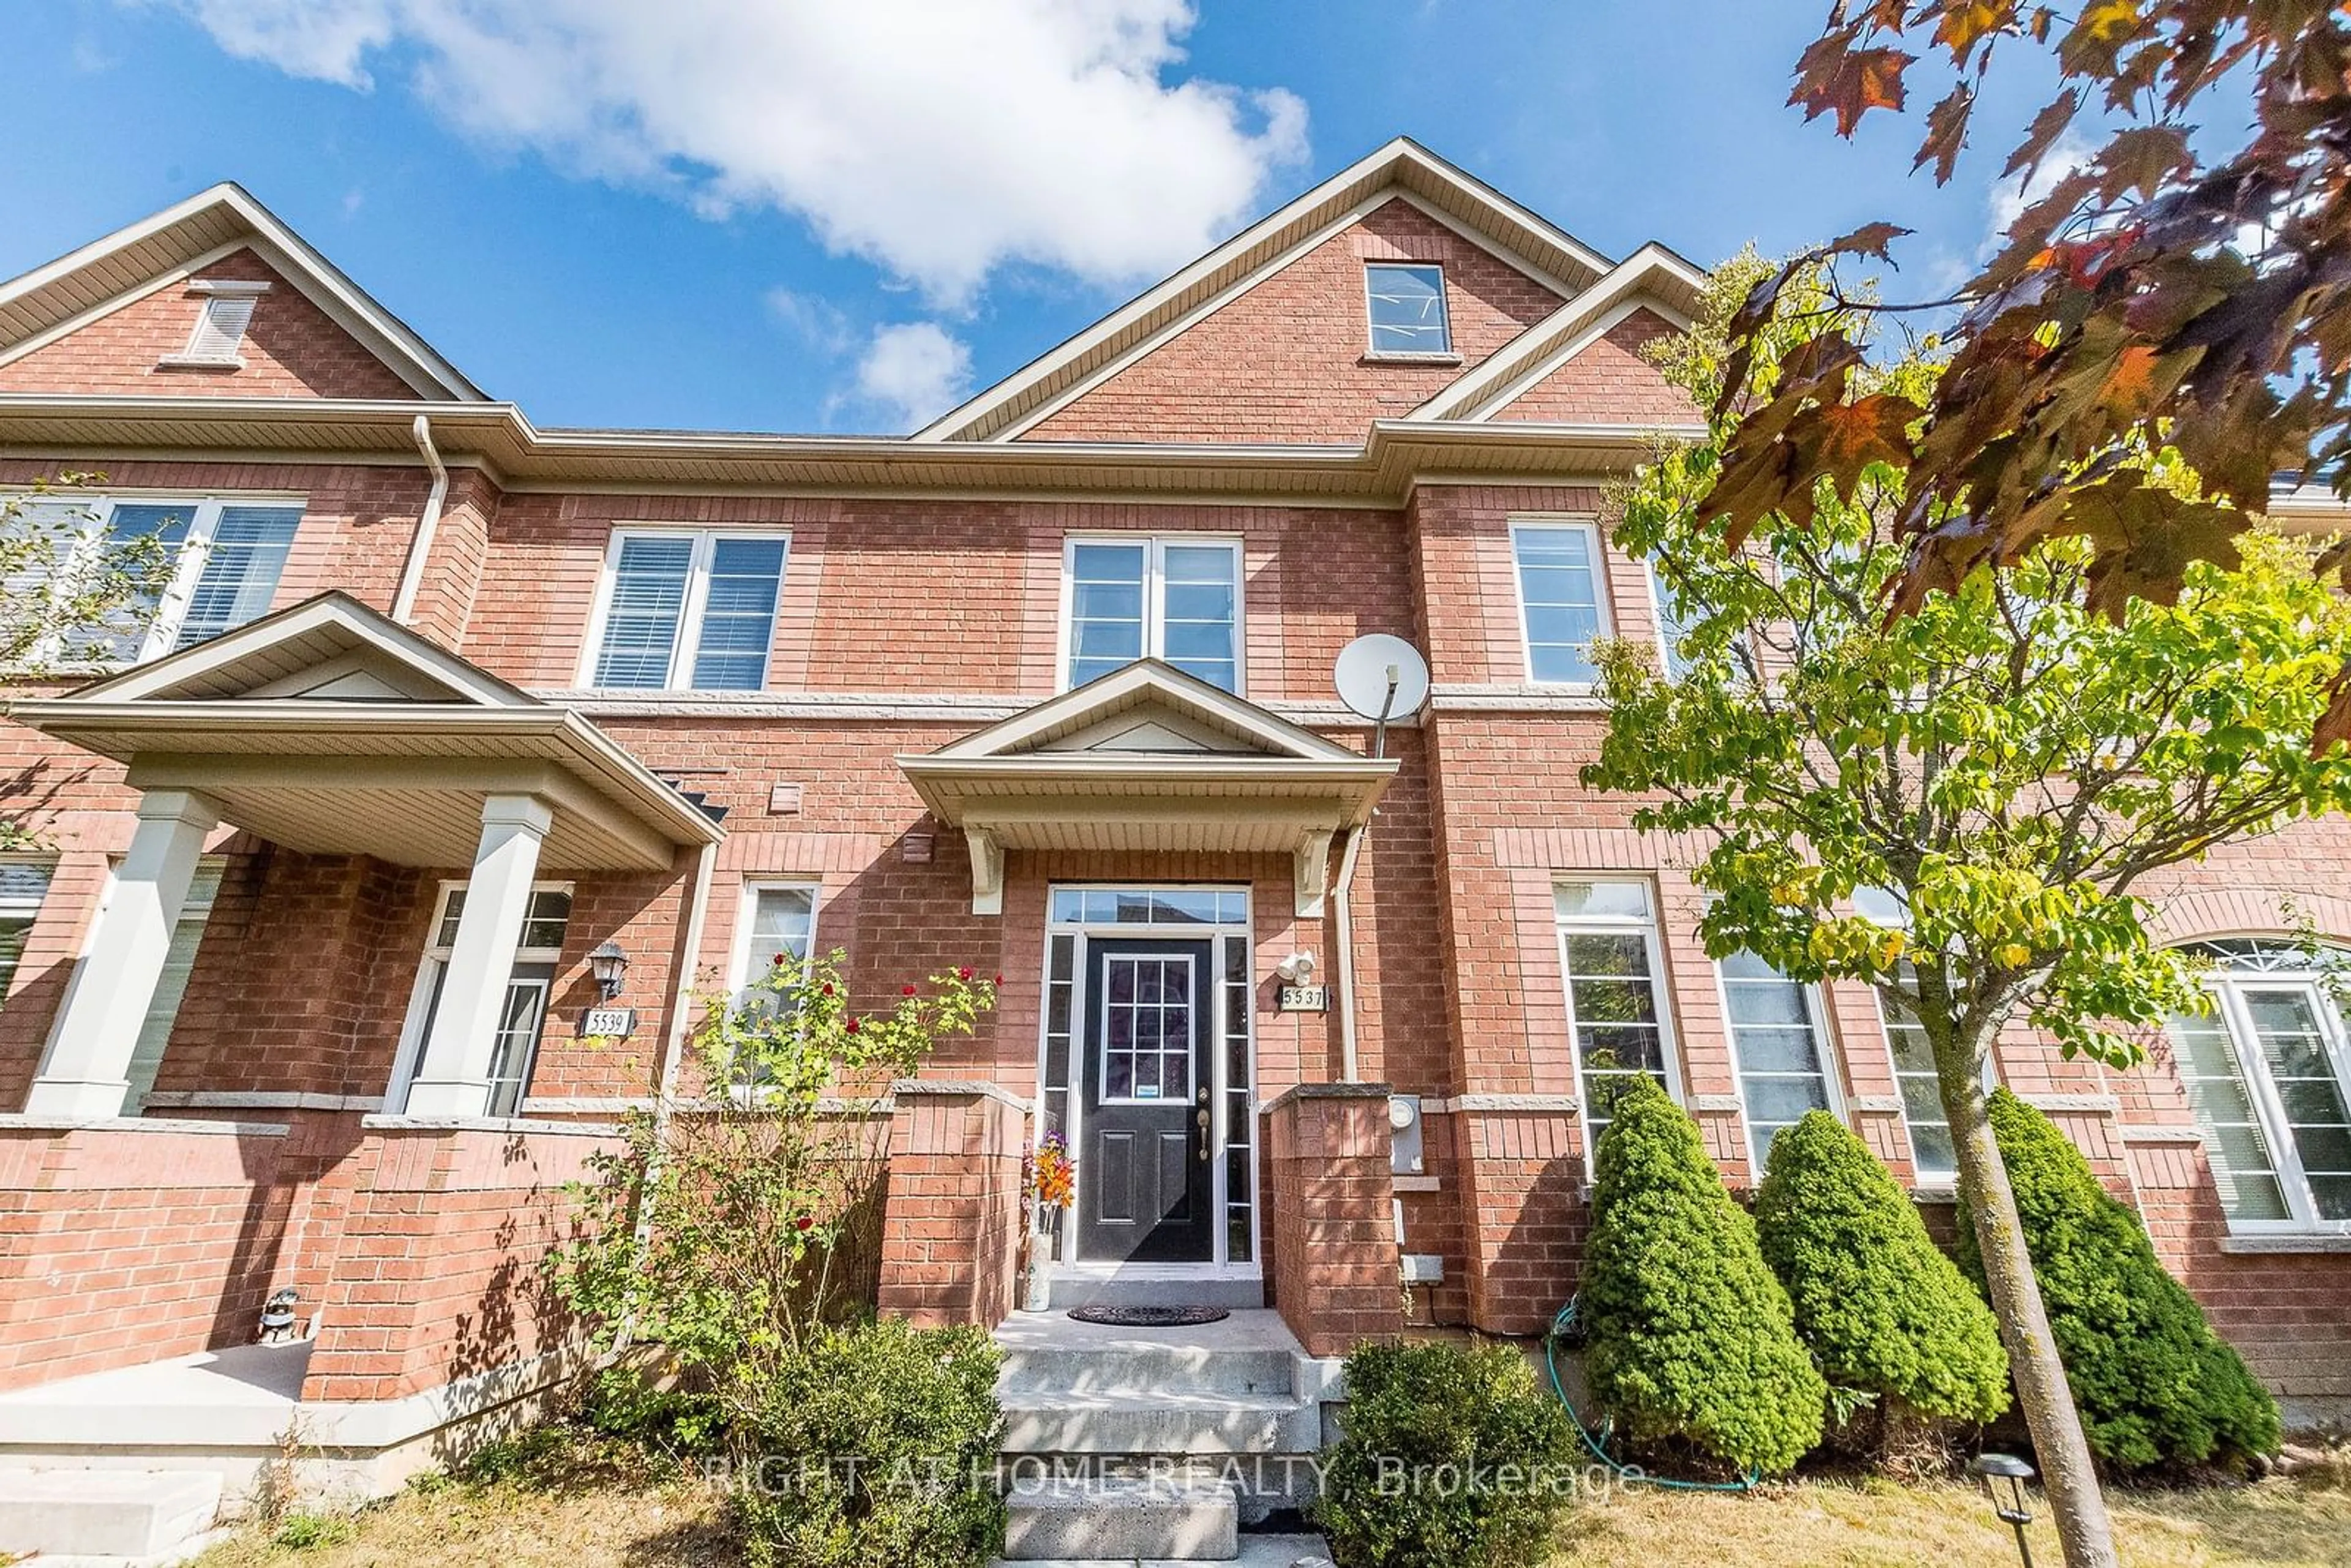 Home with brick exterior material for 5537 Waterwind Cres, Mississauga Ontario L5M 0G4